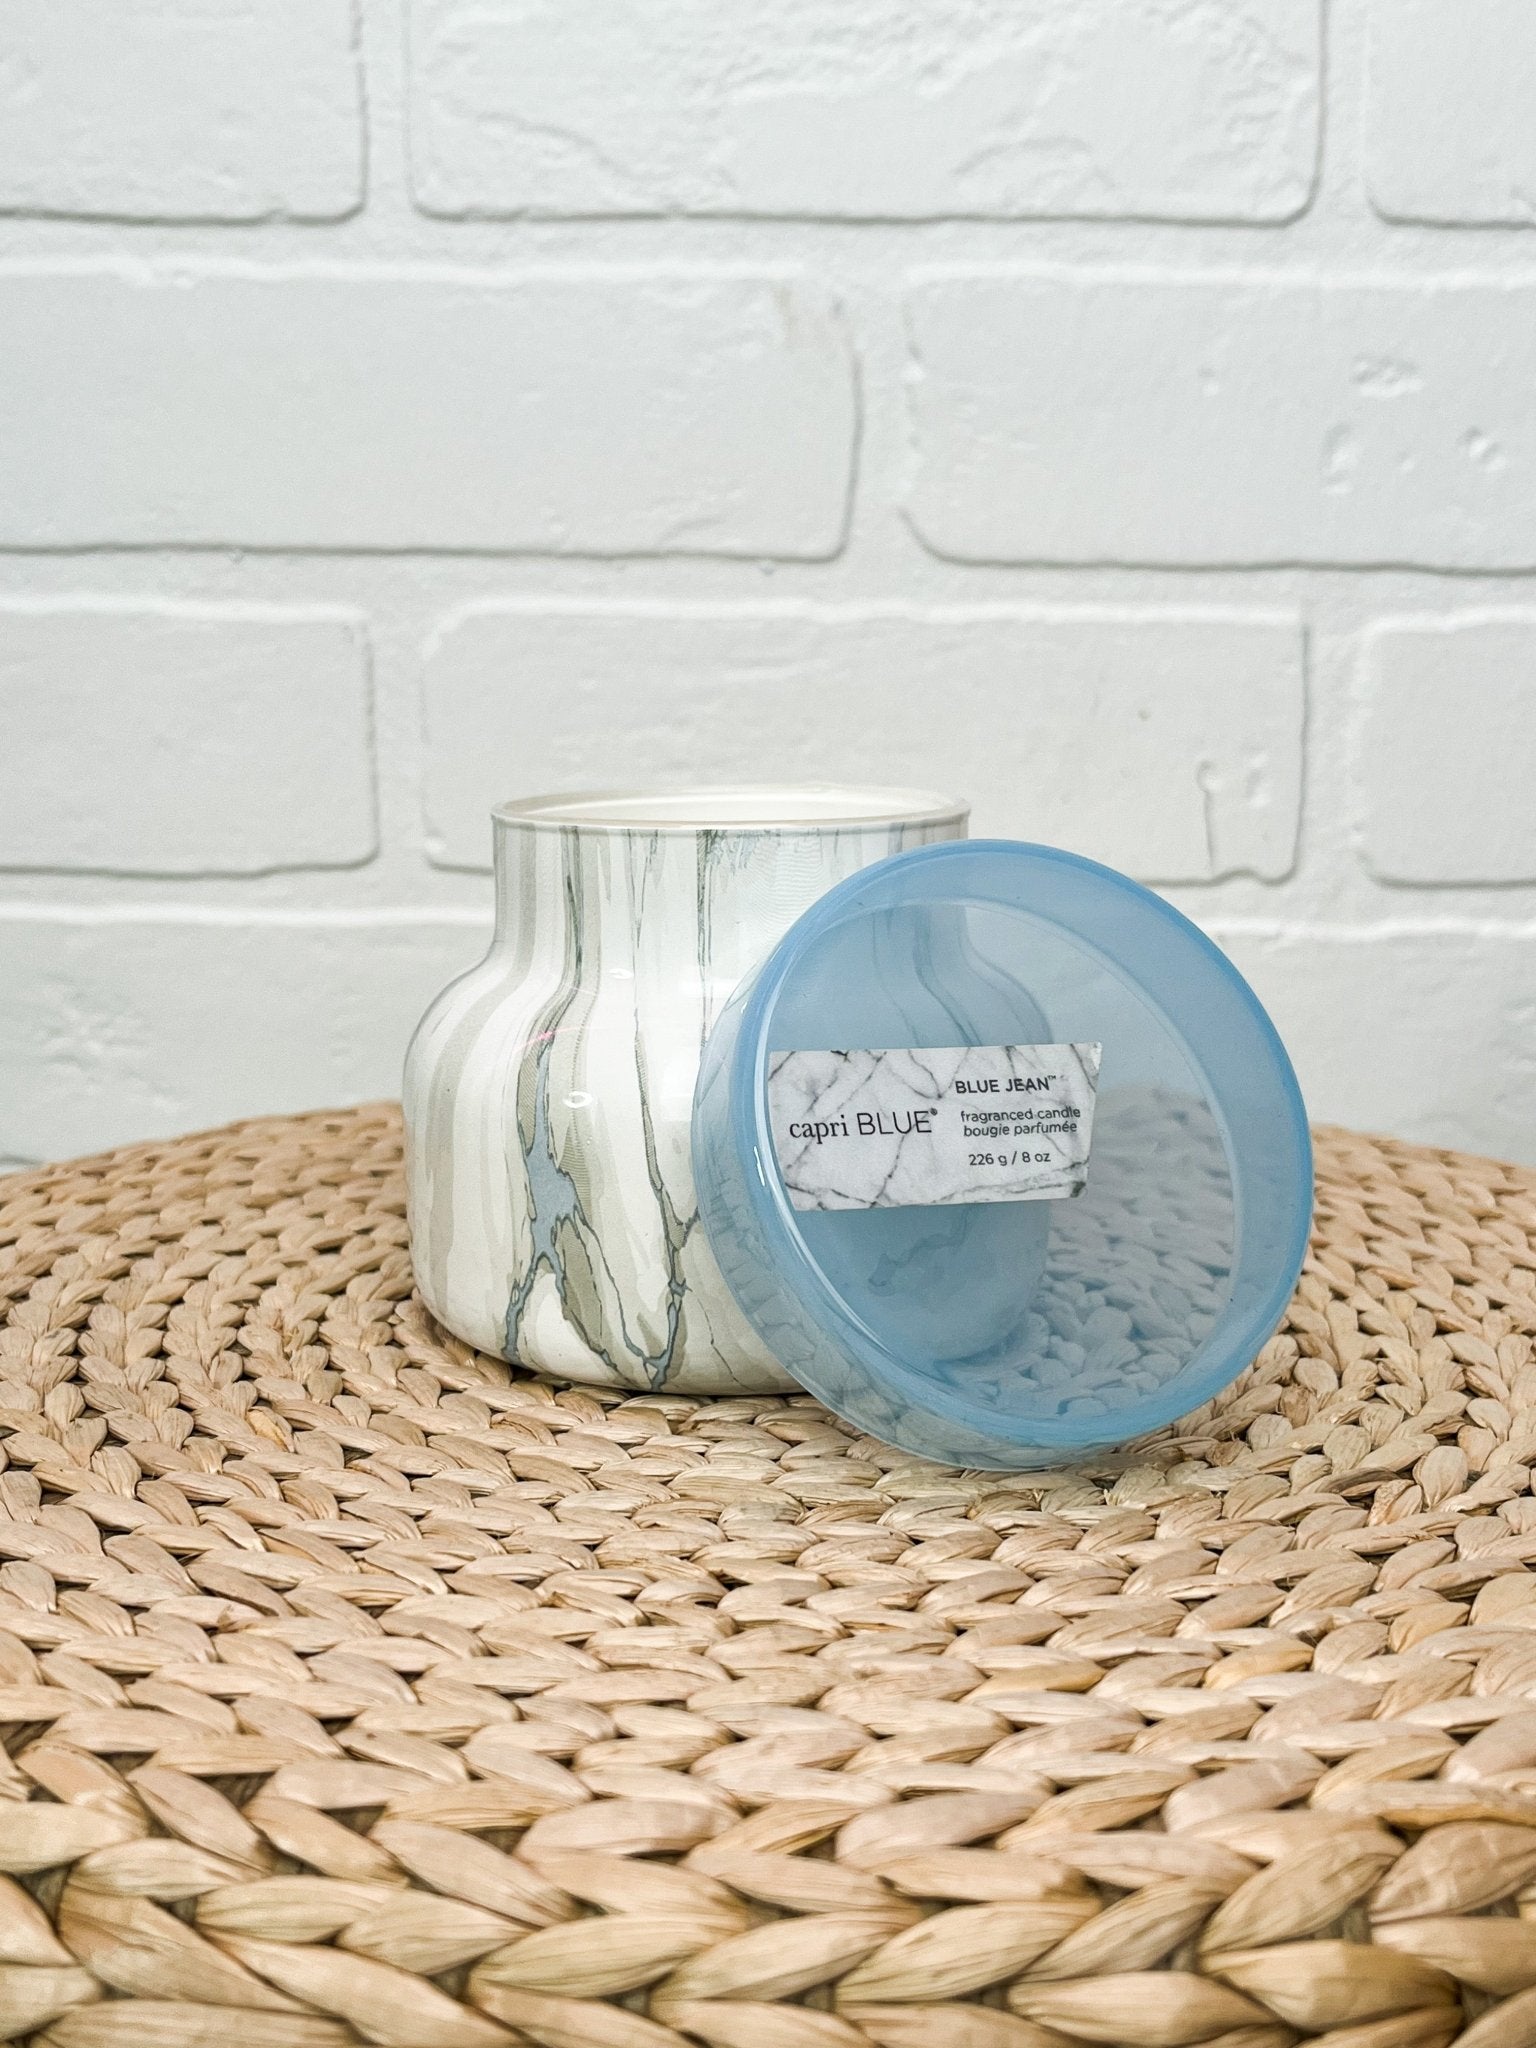 Capri Blue mod marble candle blue jean 8oz - Trendy Candles and Scents at Lush Fashion Lounge Boutique in Oklahoma City